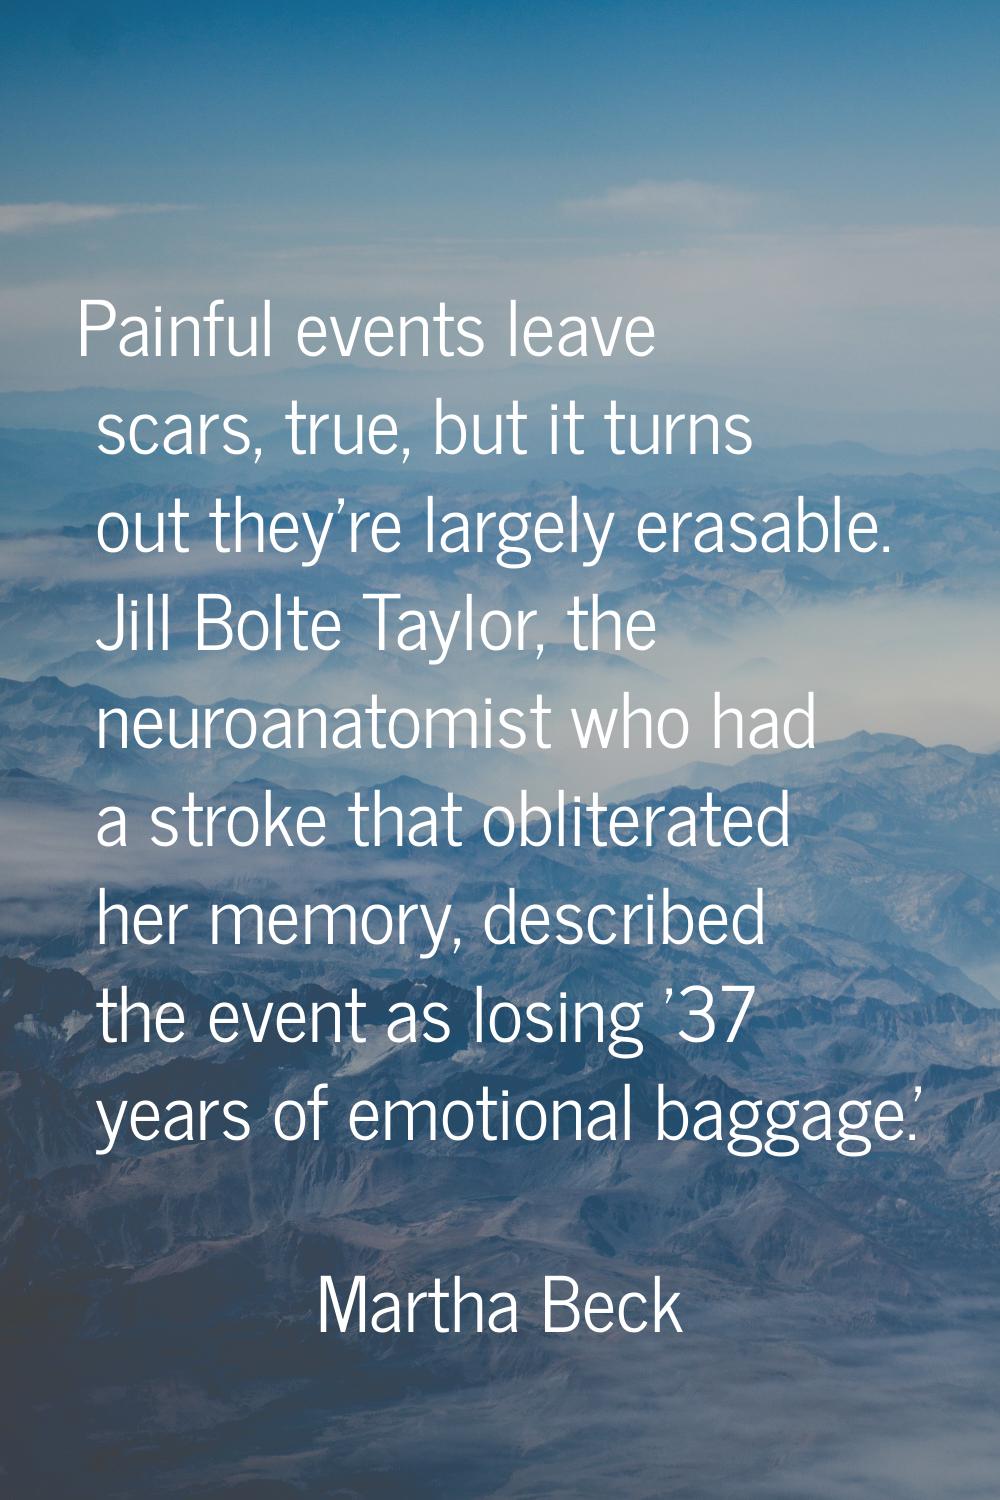 Painful events leave scars, true, but it turns out they're largely erasable. Jill Bolte Taylor, the